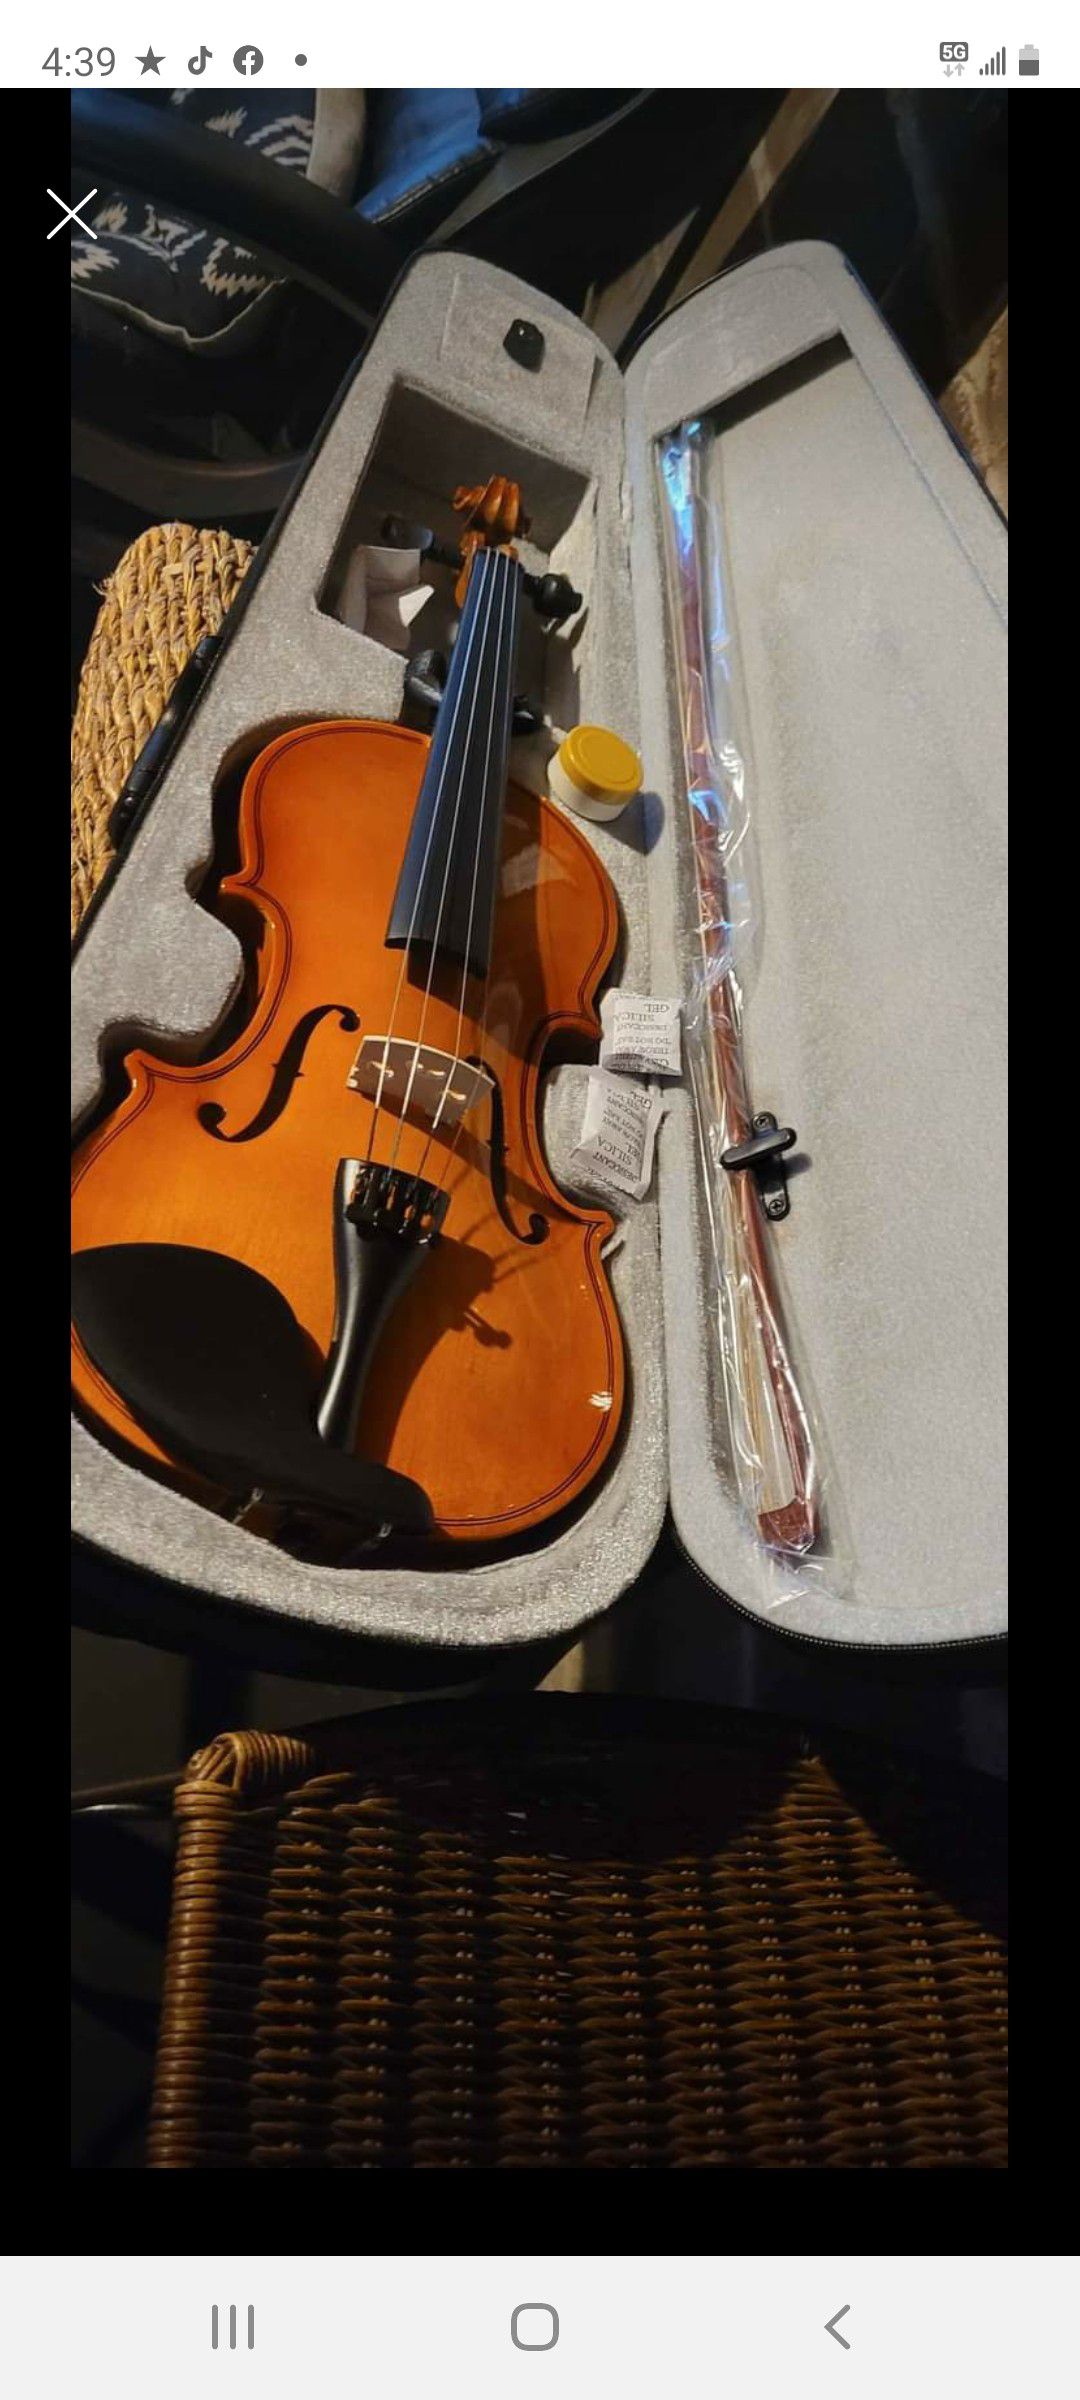 BRAND NEW VIOLIN WITH CASE AND BOW FULL SIZE